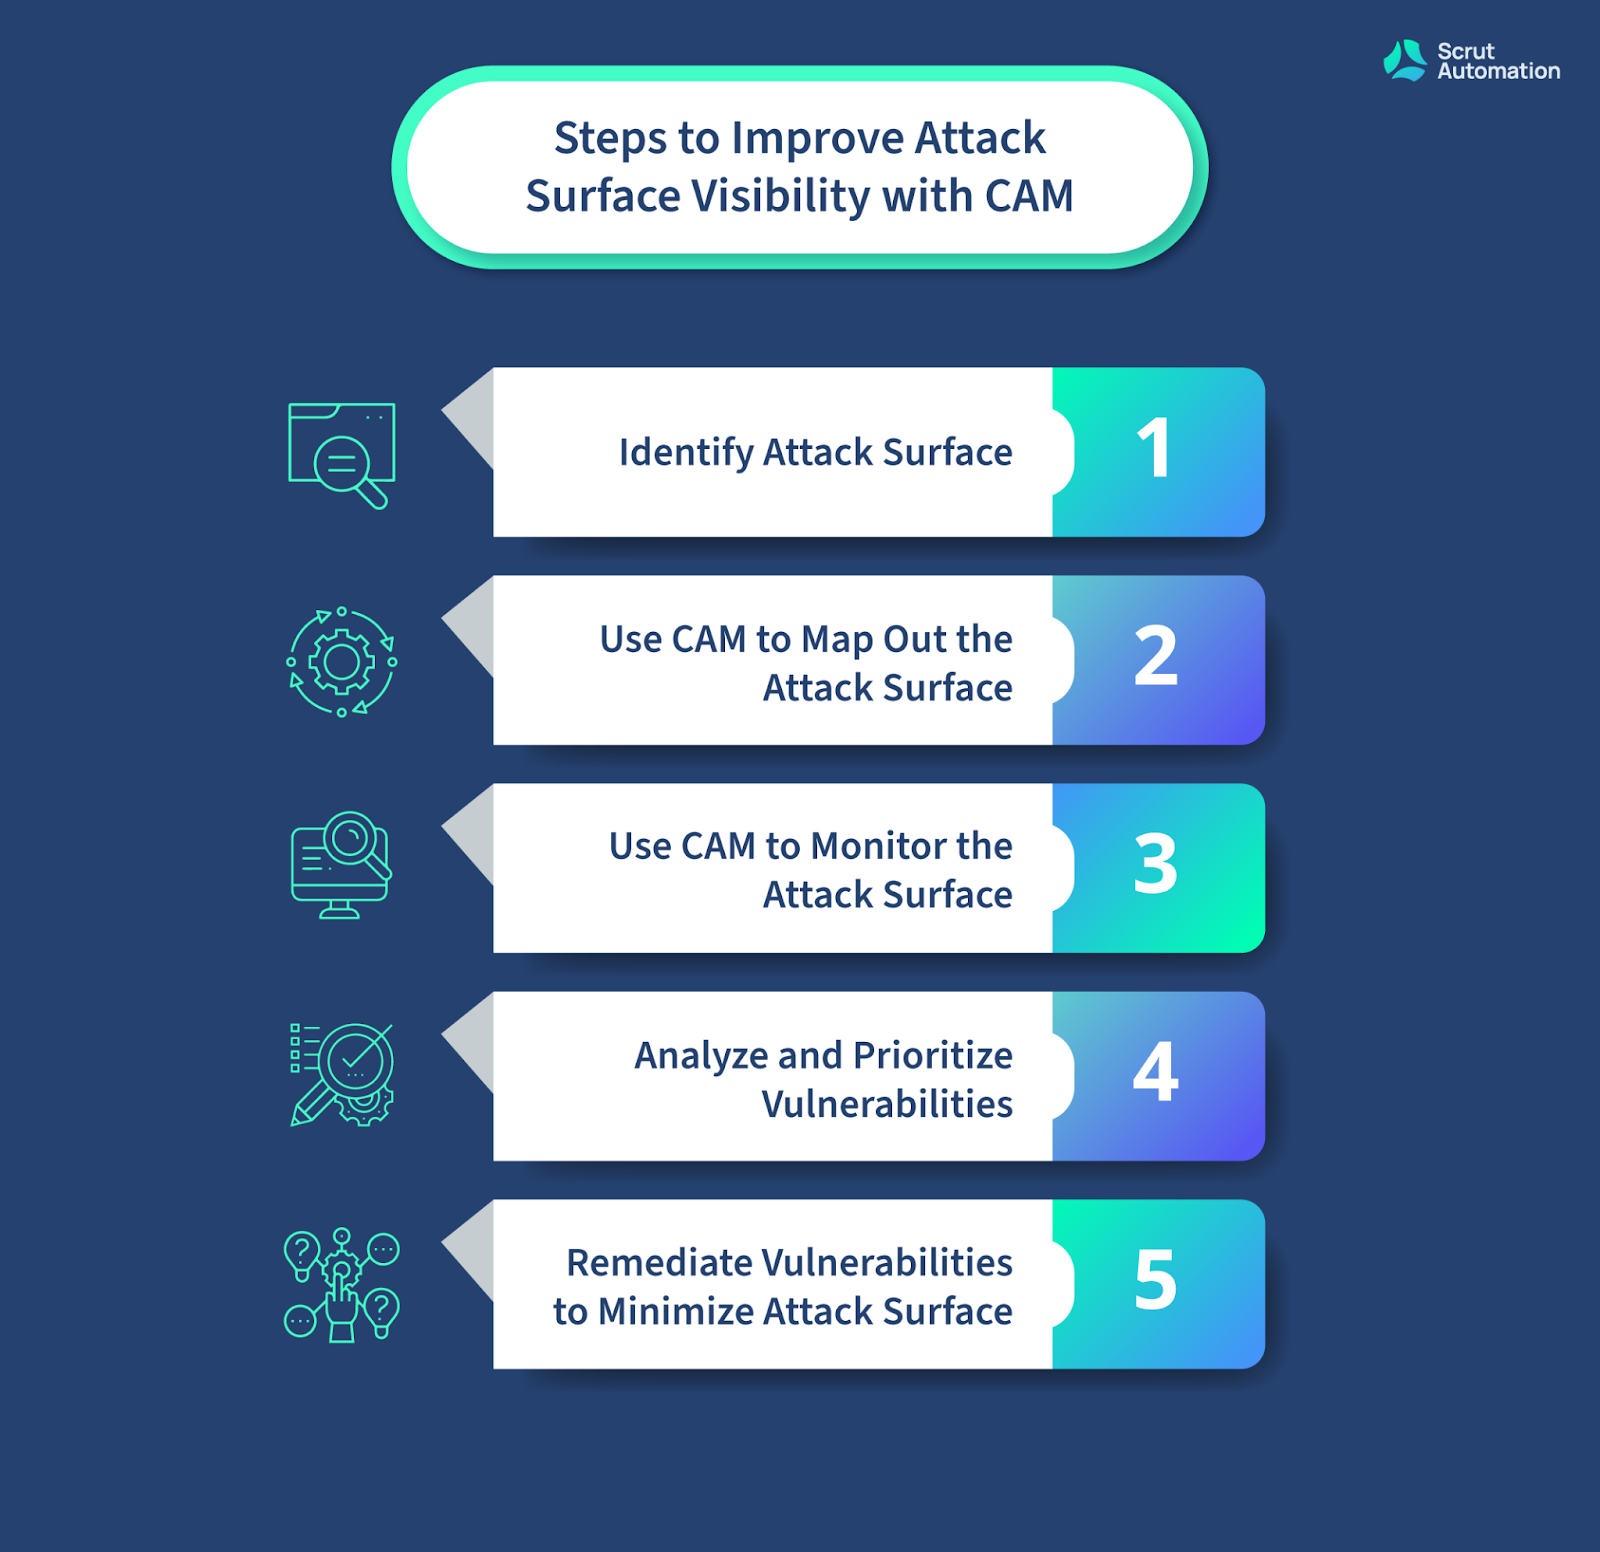 To improve attack surface visbility one must first identify the attack surface, map out cyber assets, monitor, analyze and prioritize vulnerabilities and finally remediate them.